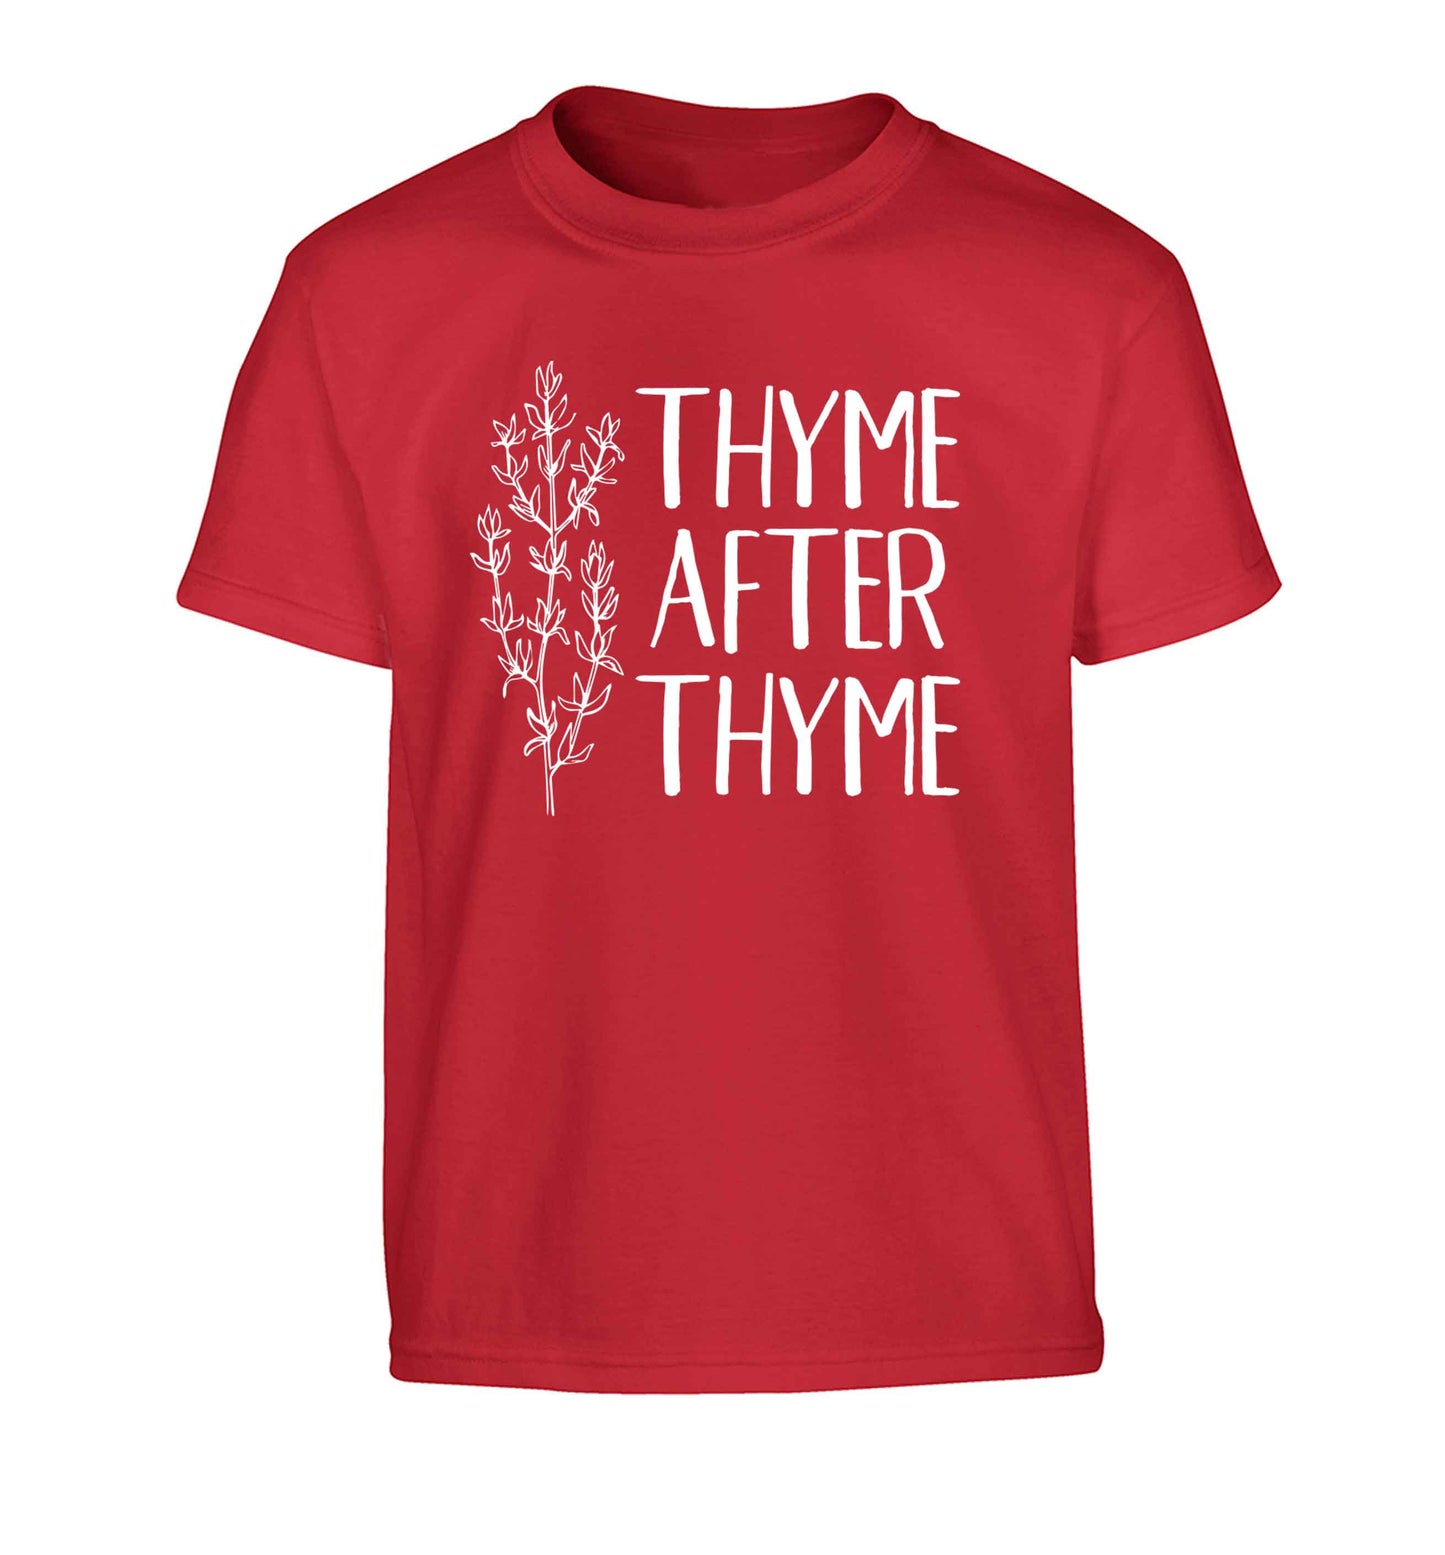 Thyme after thyme Children's red Tshirt 12-13 Years